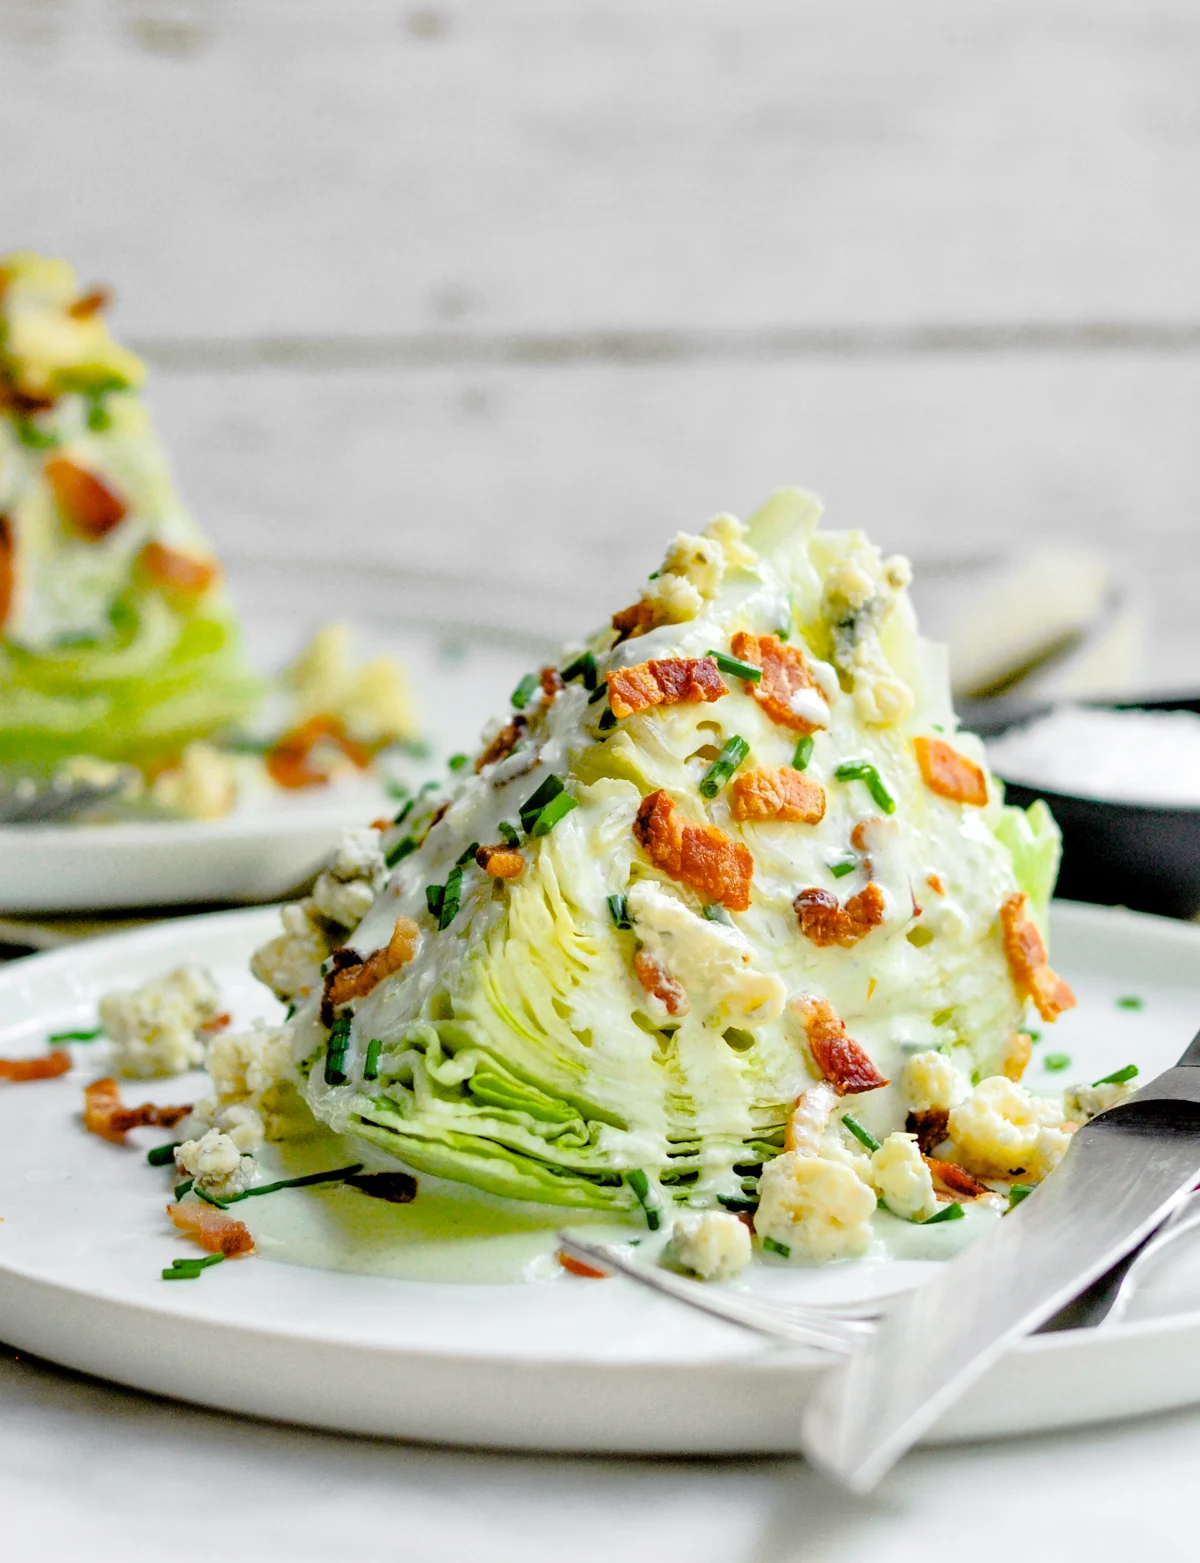 Wedge Salad served on white plates with knife and fork. 